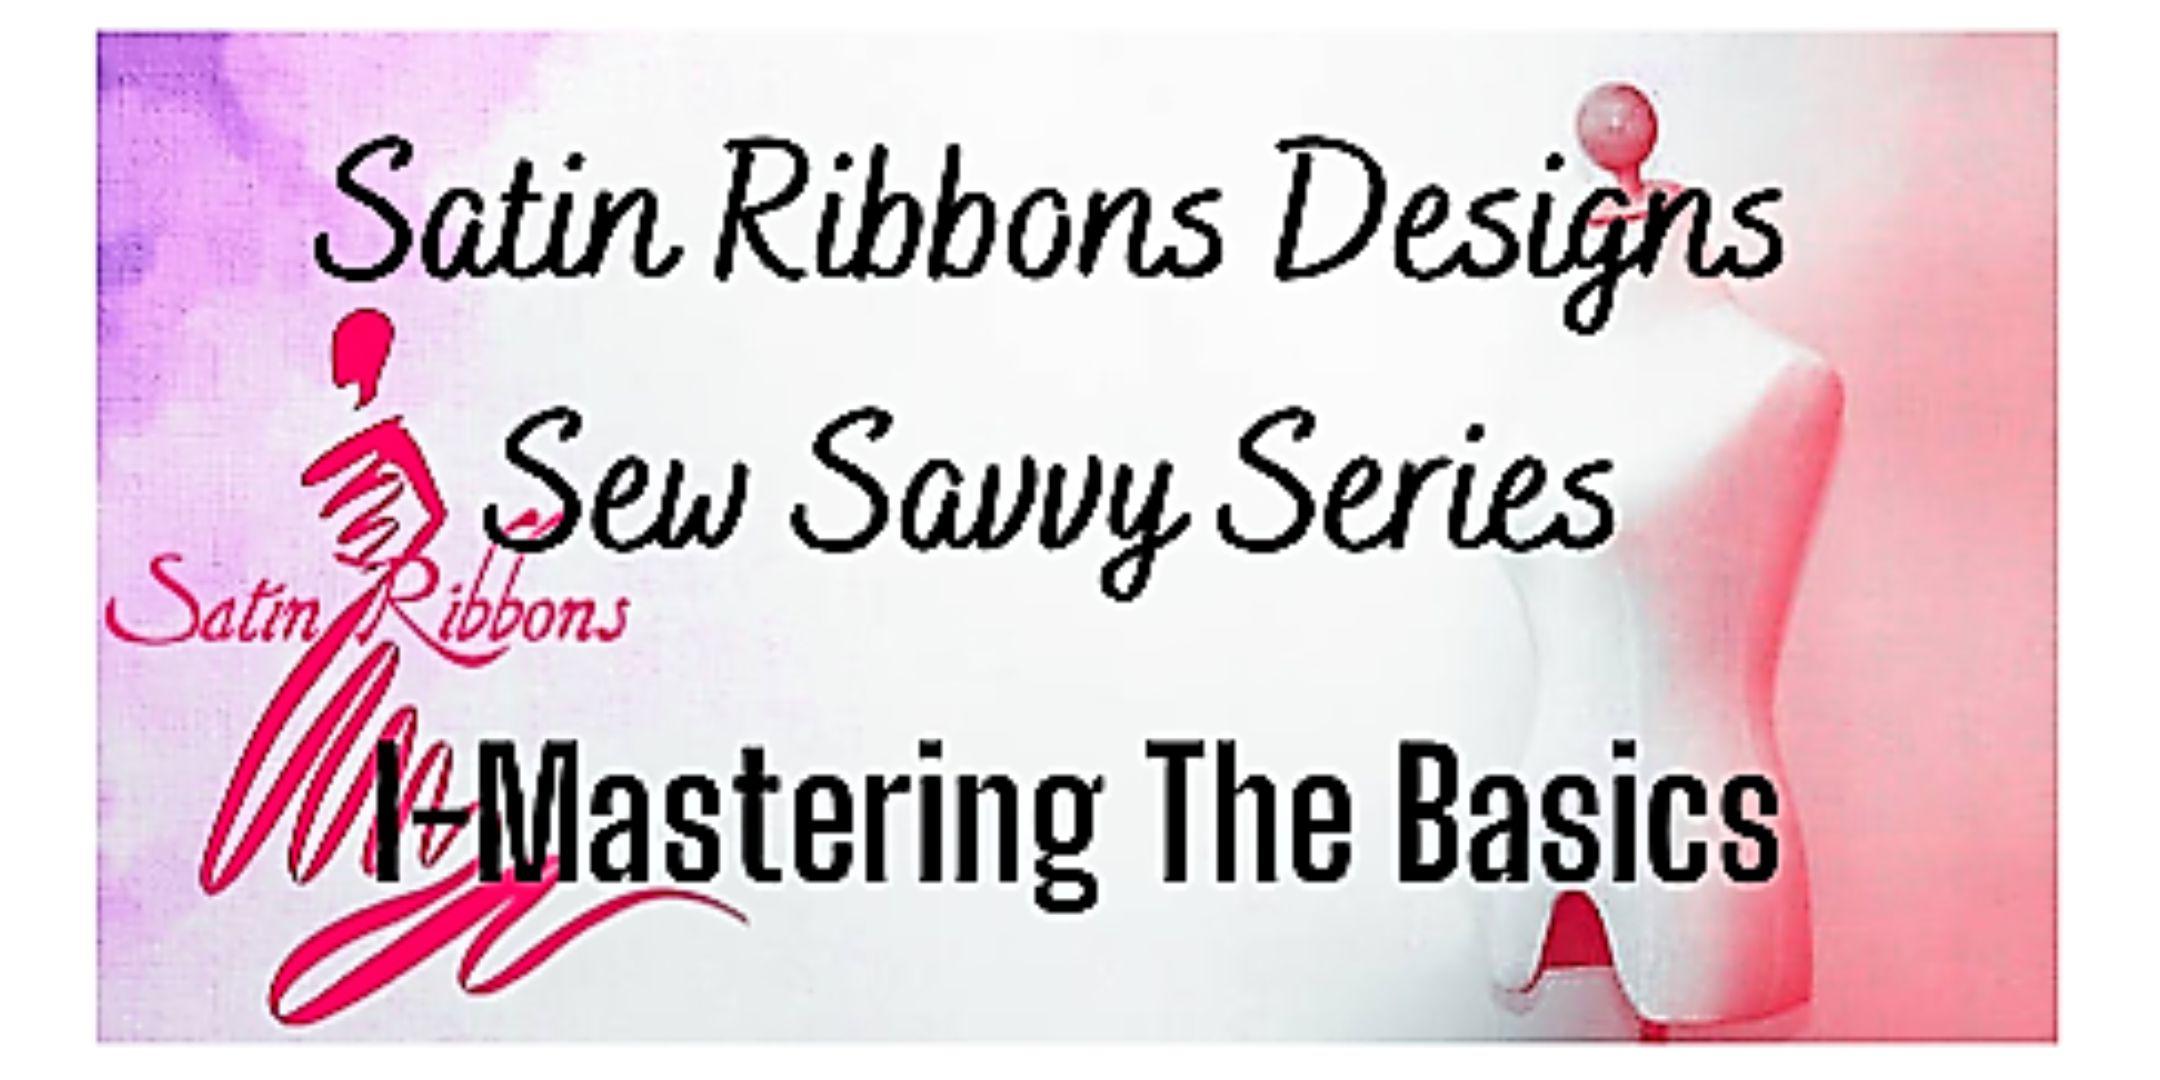 Satin Ribbons Designs Sew Savvy Series - I Mastering the Basics Tickets,  Multiple Dates